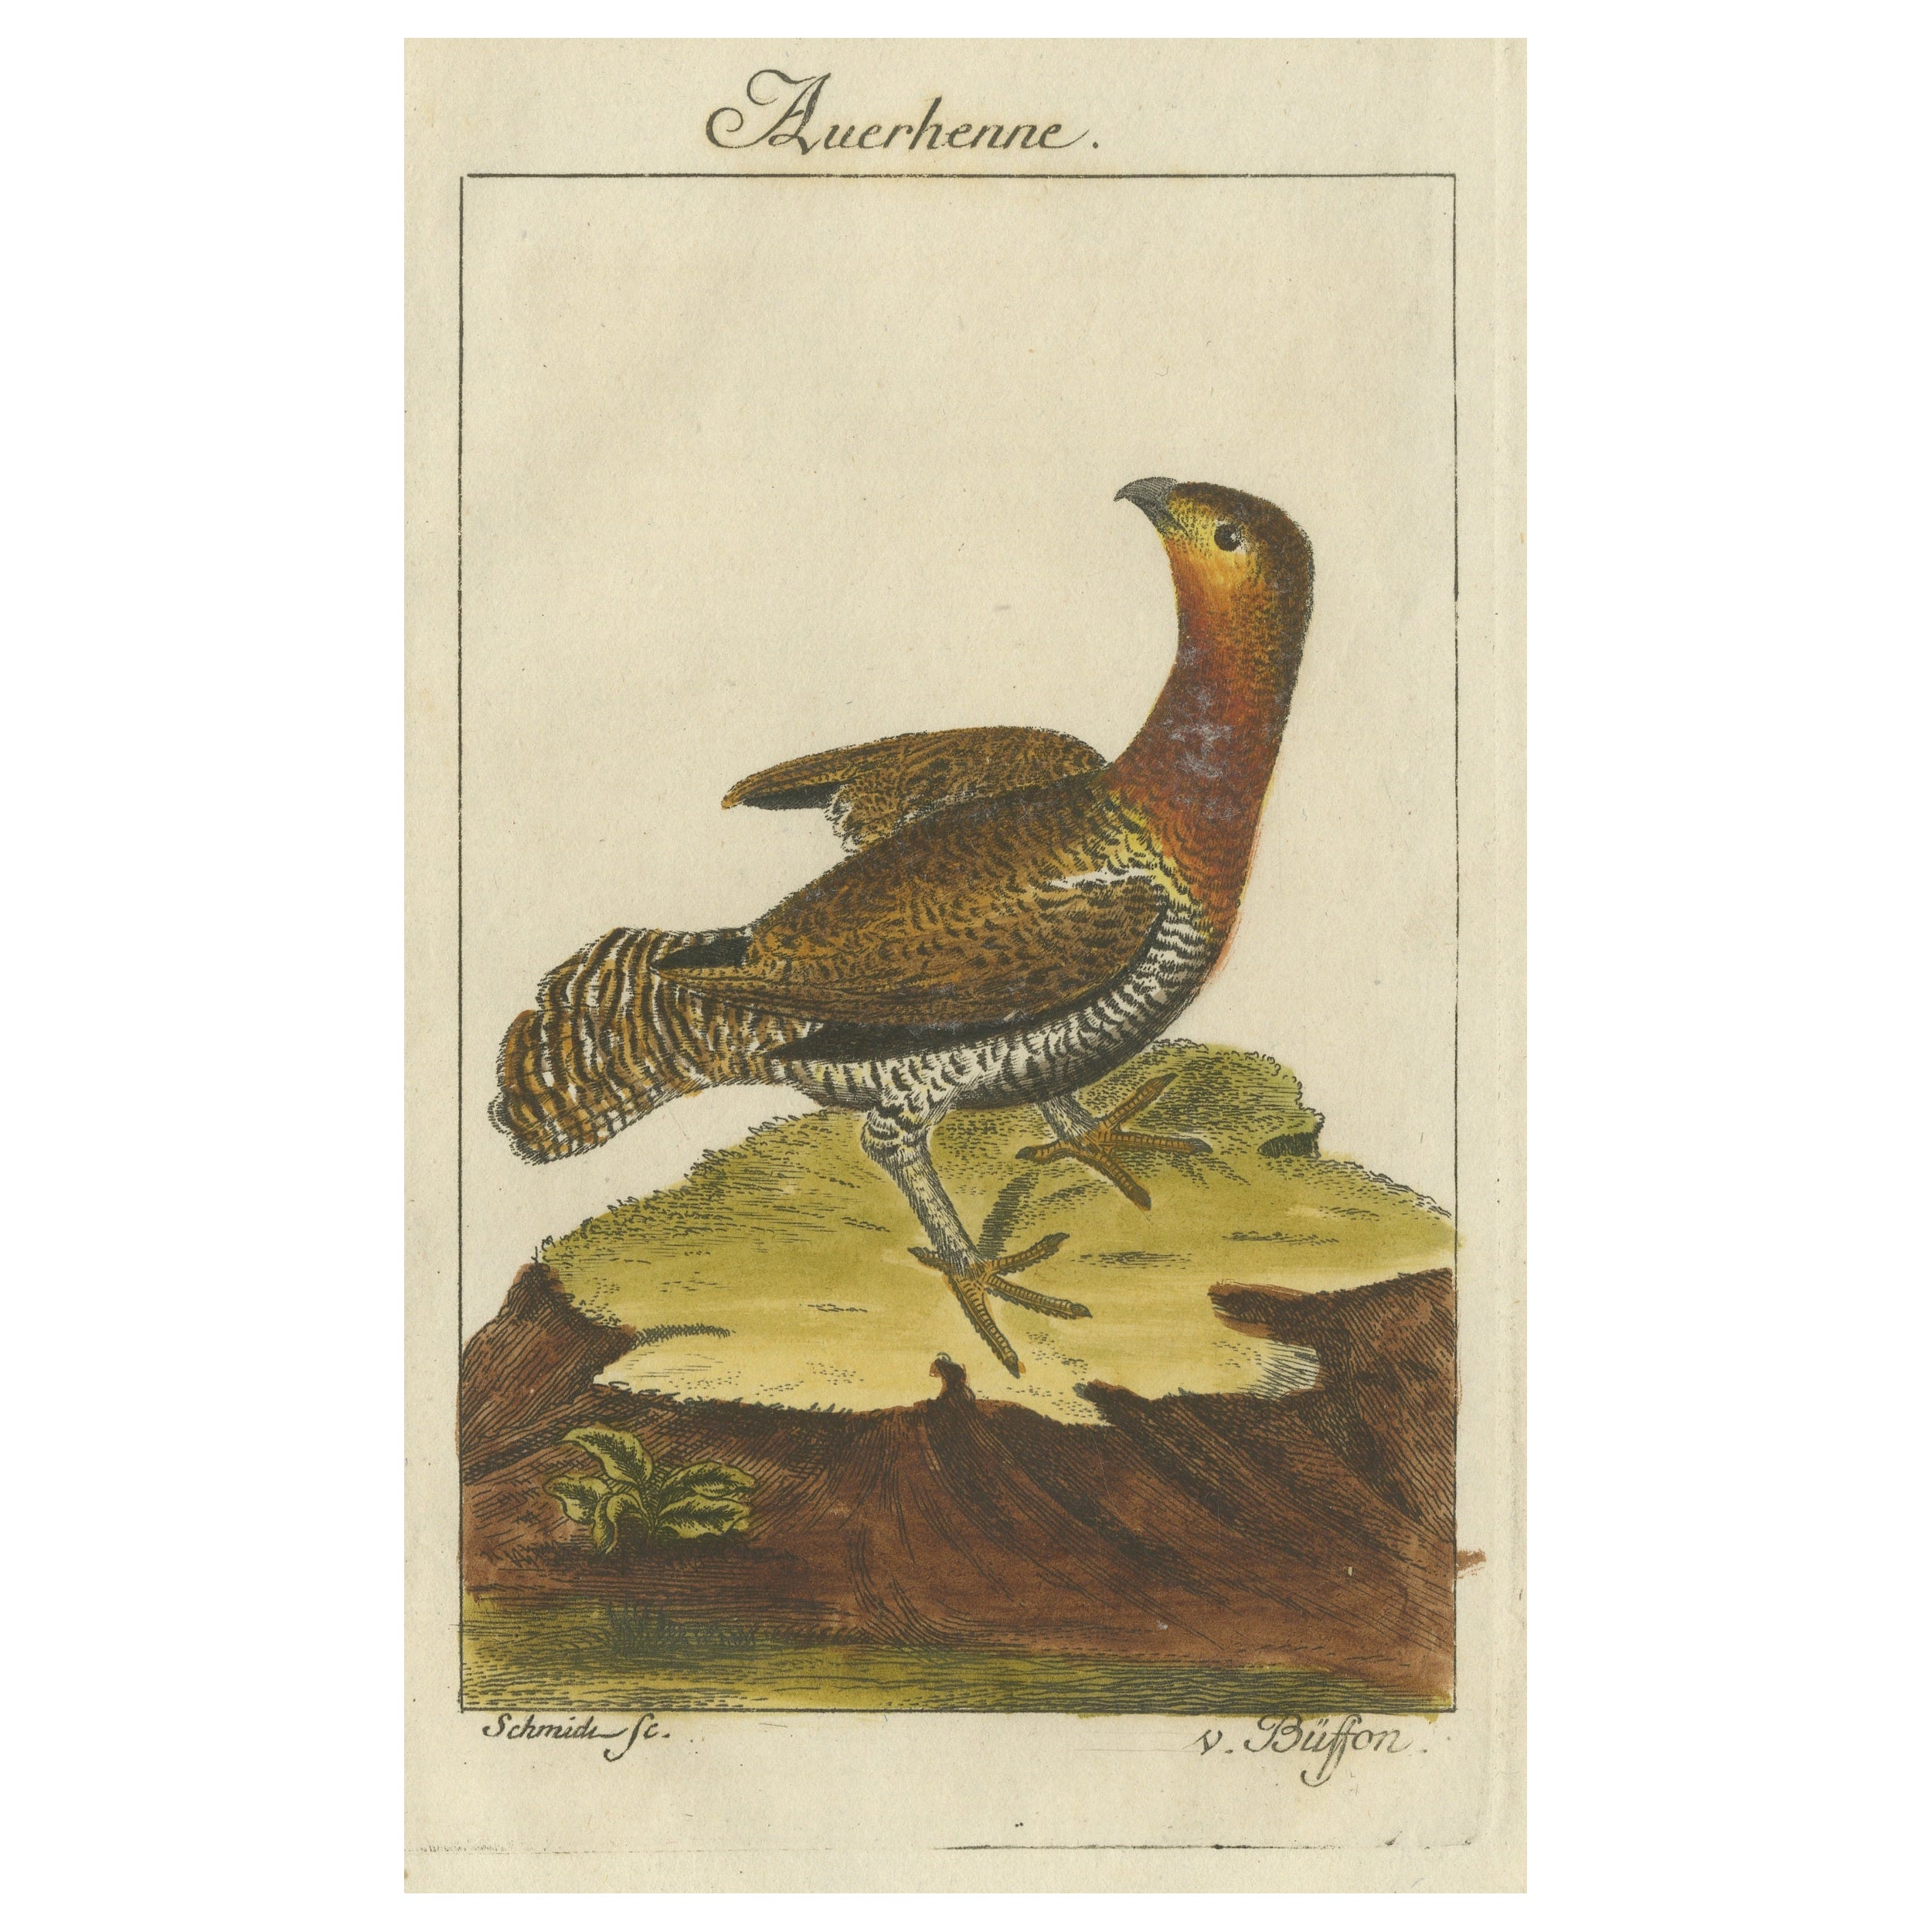 Antique Bird Print of a Western Capercaillie or Wood Grouse Hen